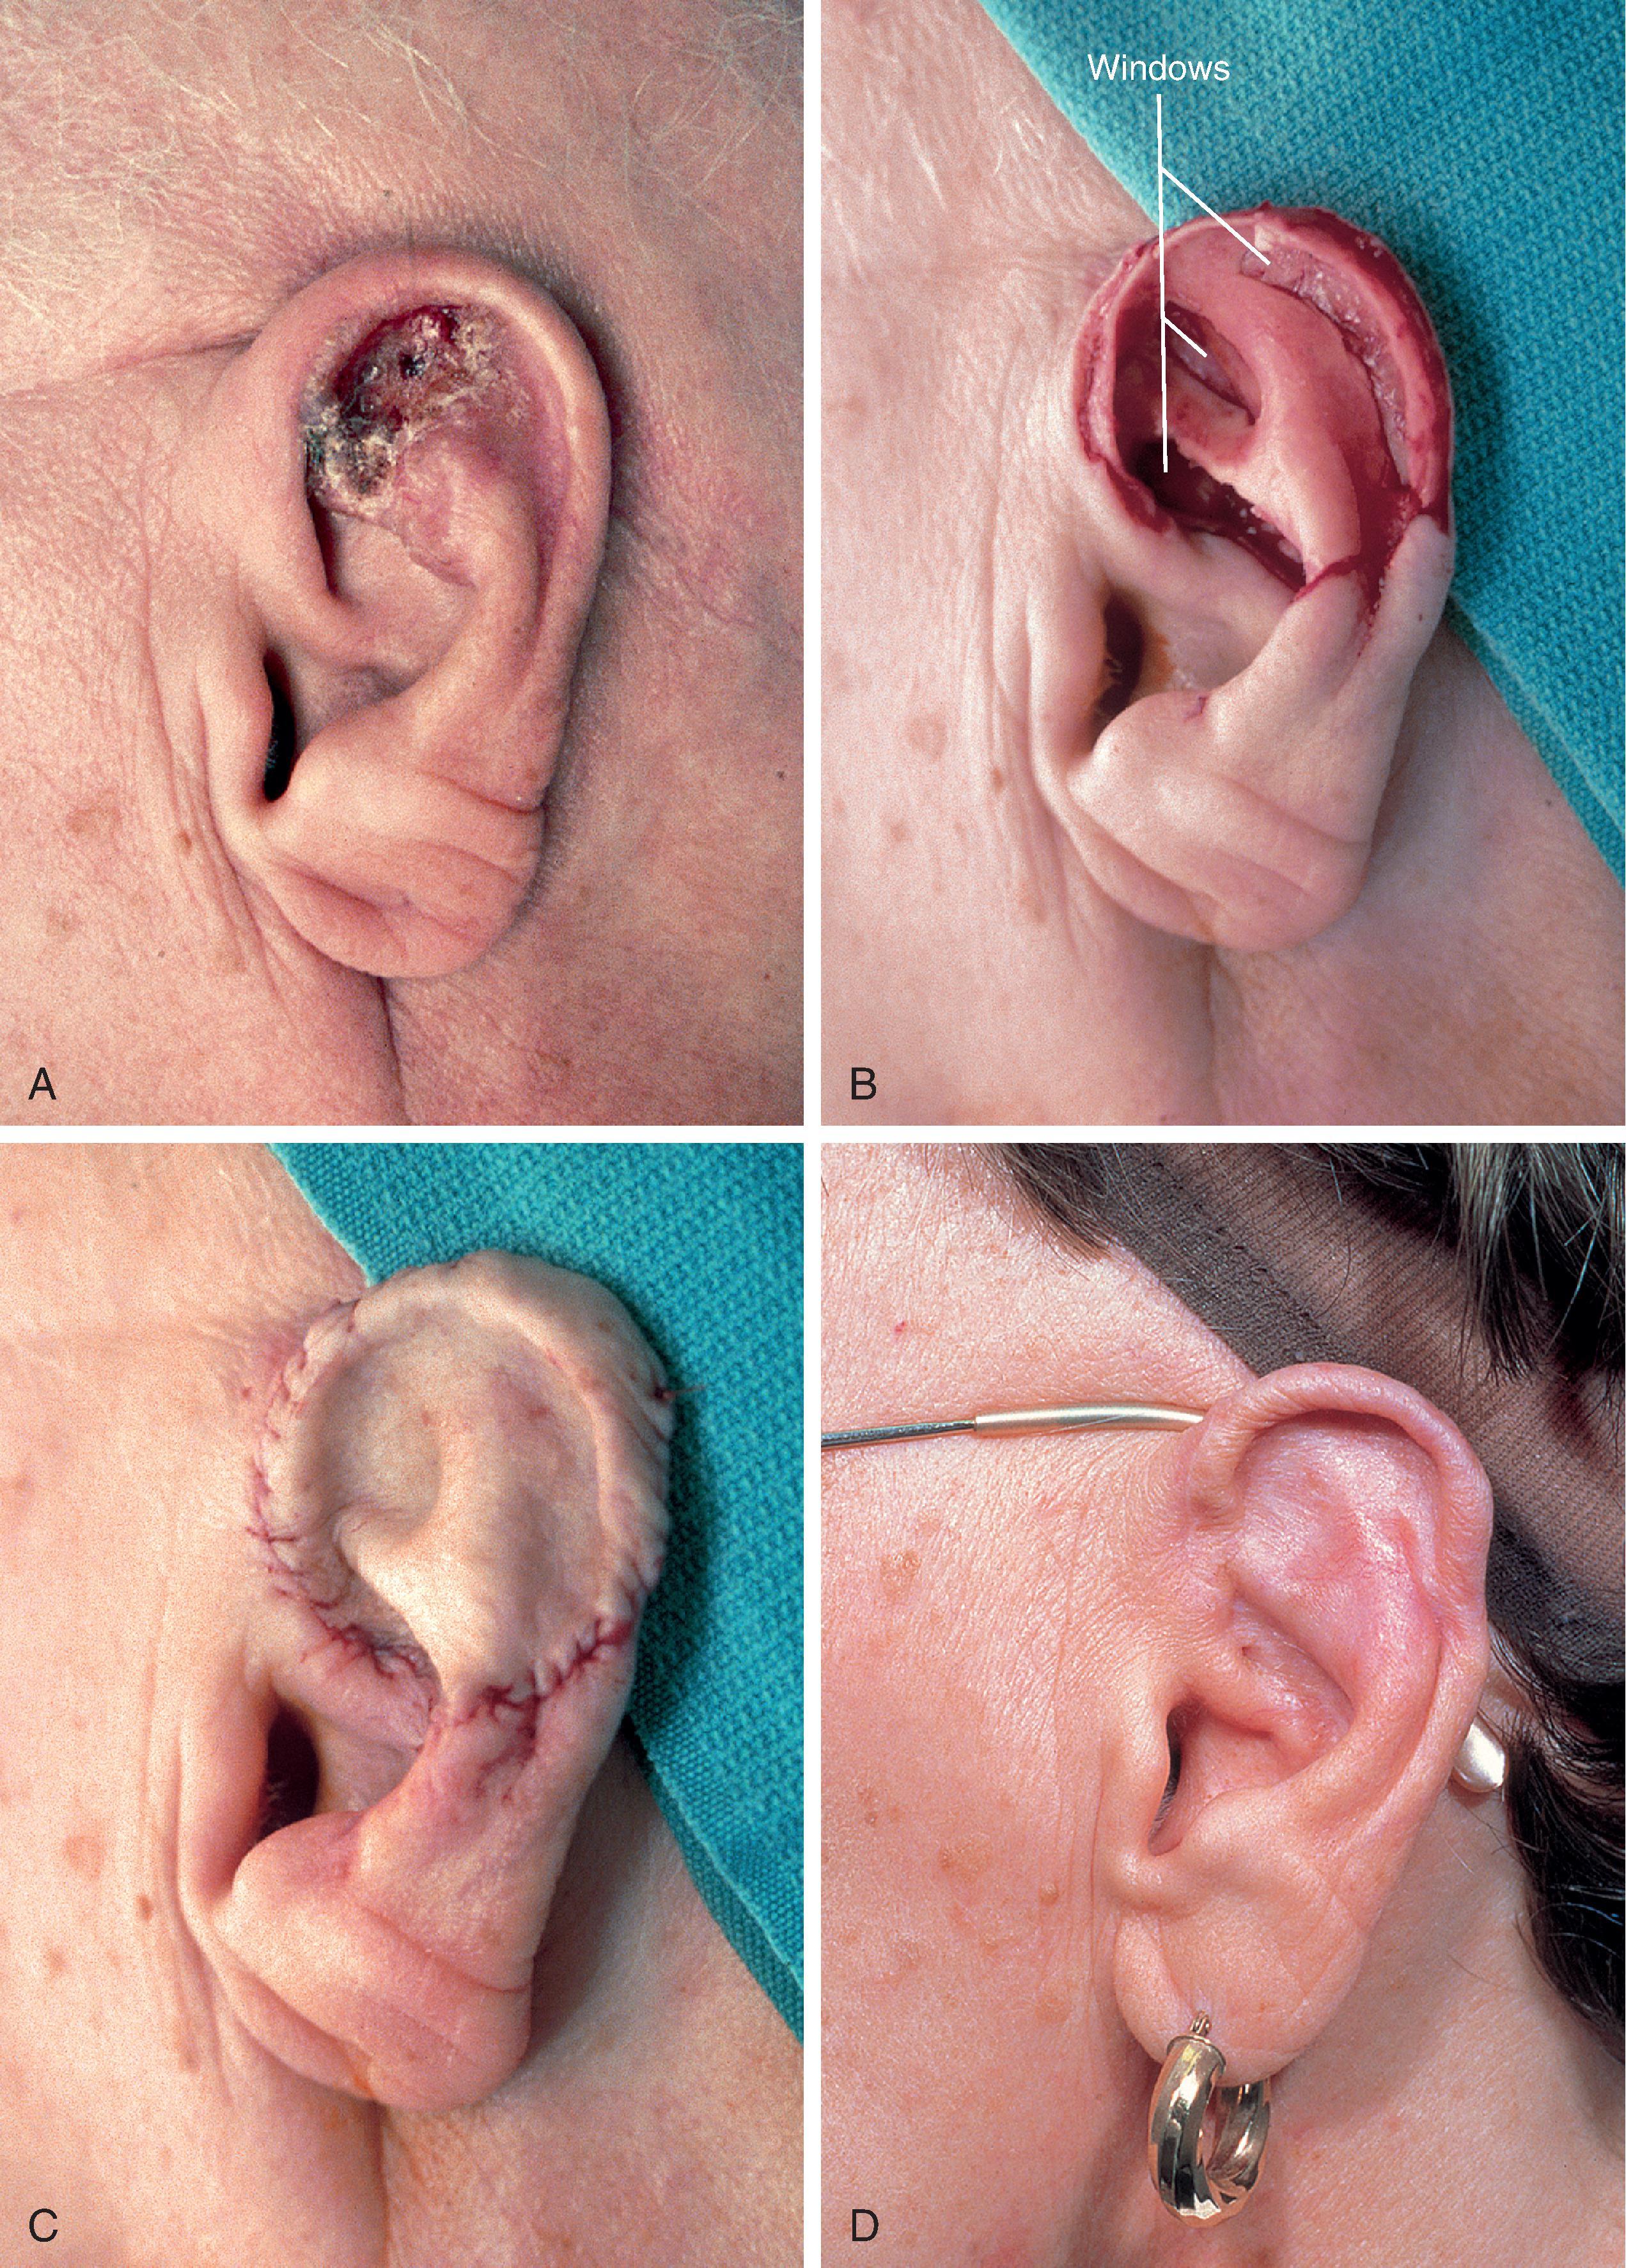 FIG. 15.5, A , Basal cell carcinoma of auricle. B , After tumor resection, windows made through cartilage for portals of ingrowth of blood vessels to nourish skin graft. C , Thin full-thickness skin graft in place. D , Six months postoperative. No revision surgery performed. (Courtesy Shan R. Baker, MD.)